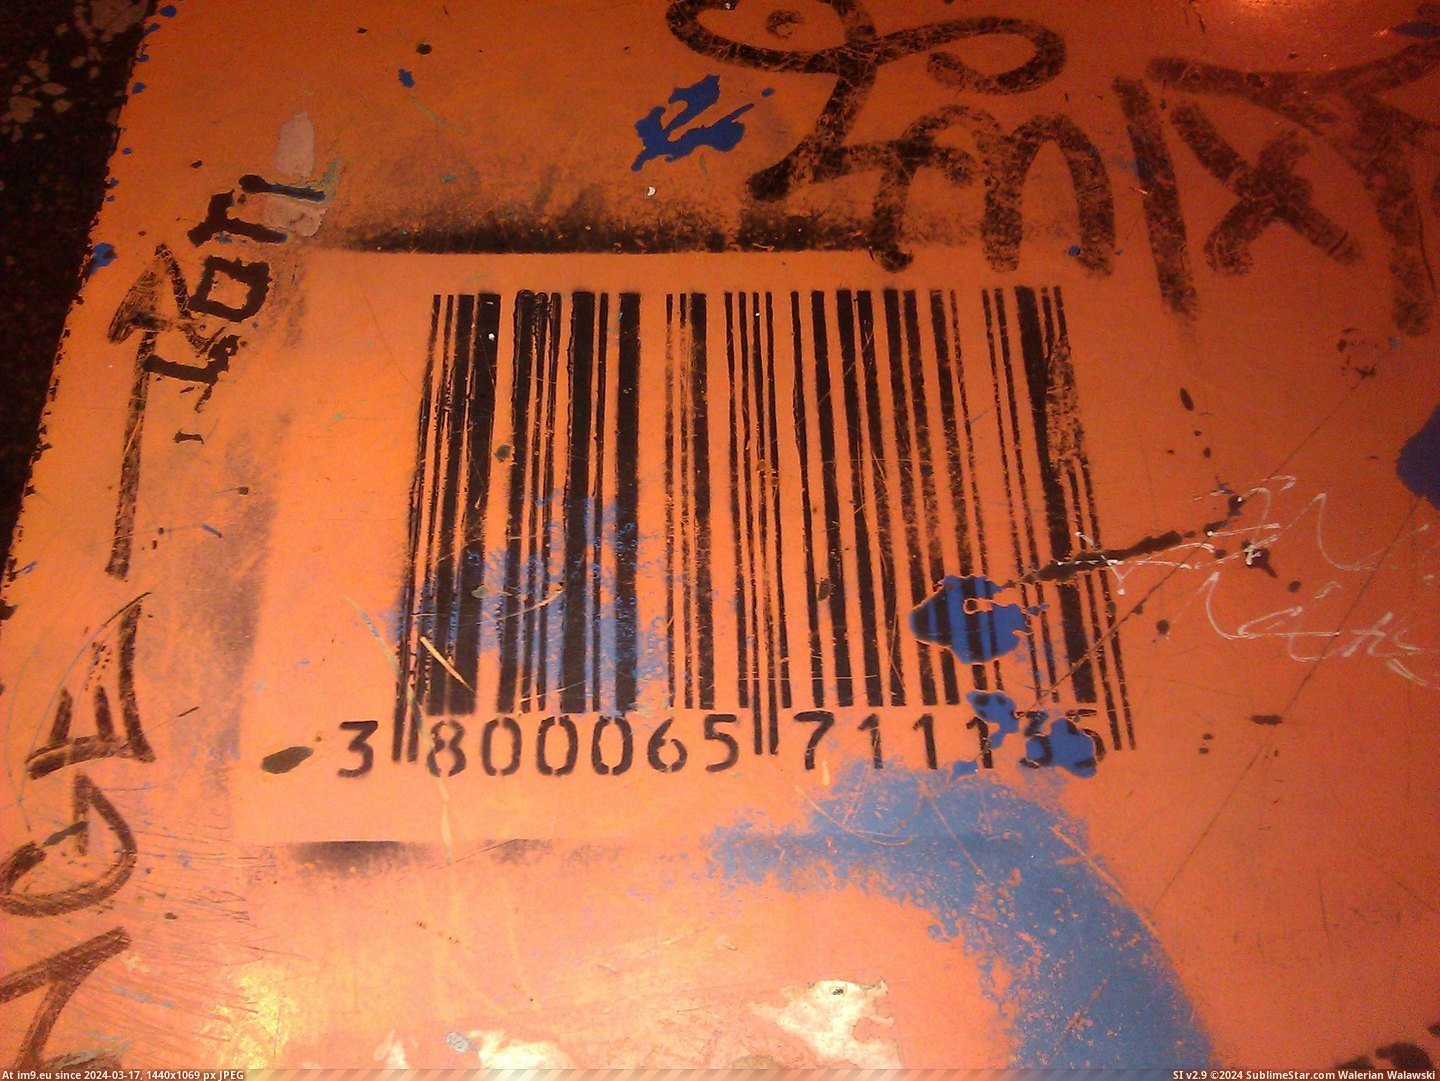 #Funny #Box #Stop #Newspaper #Graffiti #Barcode #Scanned #Interesting #Bus #App [Funny] Interesting graffiti on the newspaper box at my bus stop. It actually scanned with my barcode app. O_O 1 Pic. (Image of album My r/FUNNY favs))